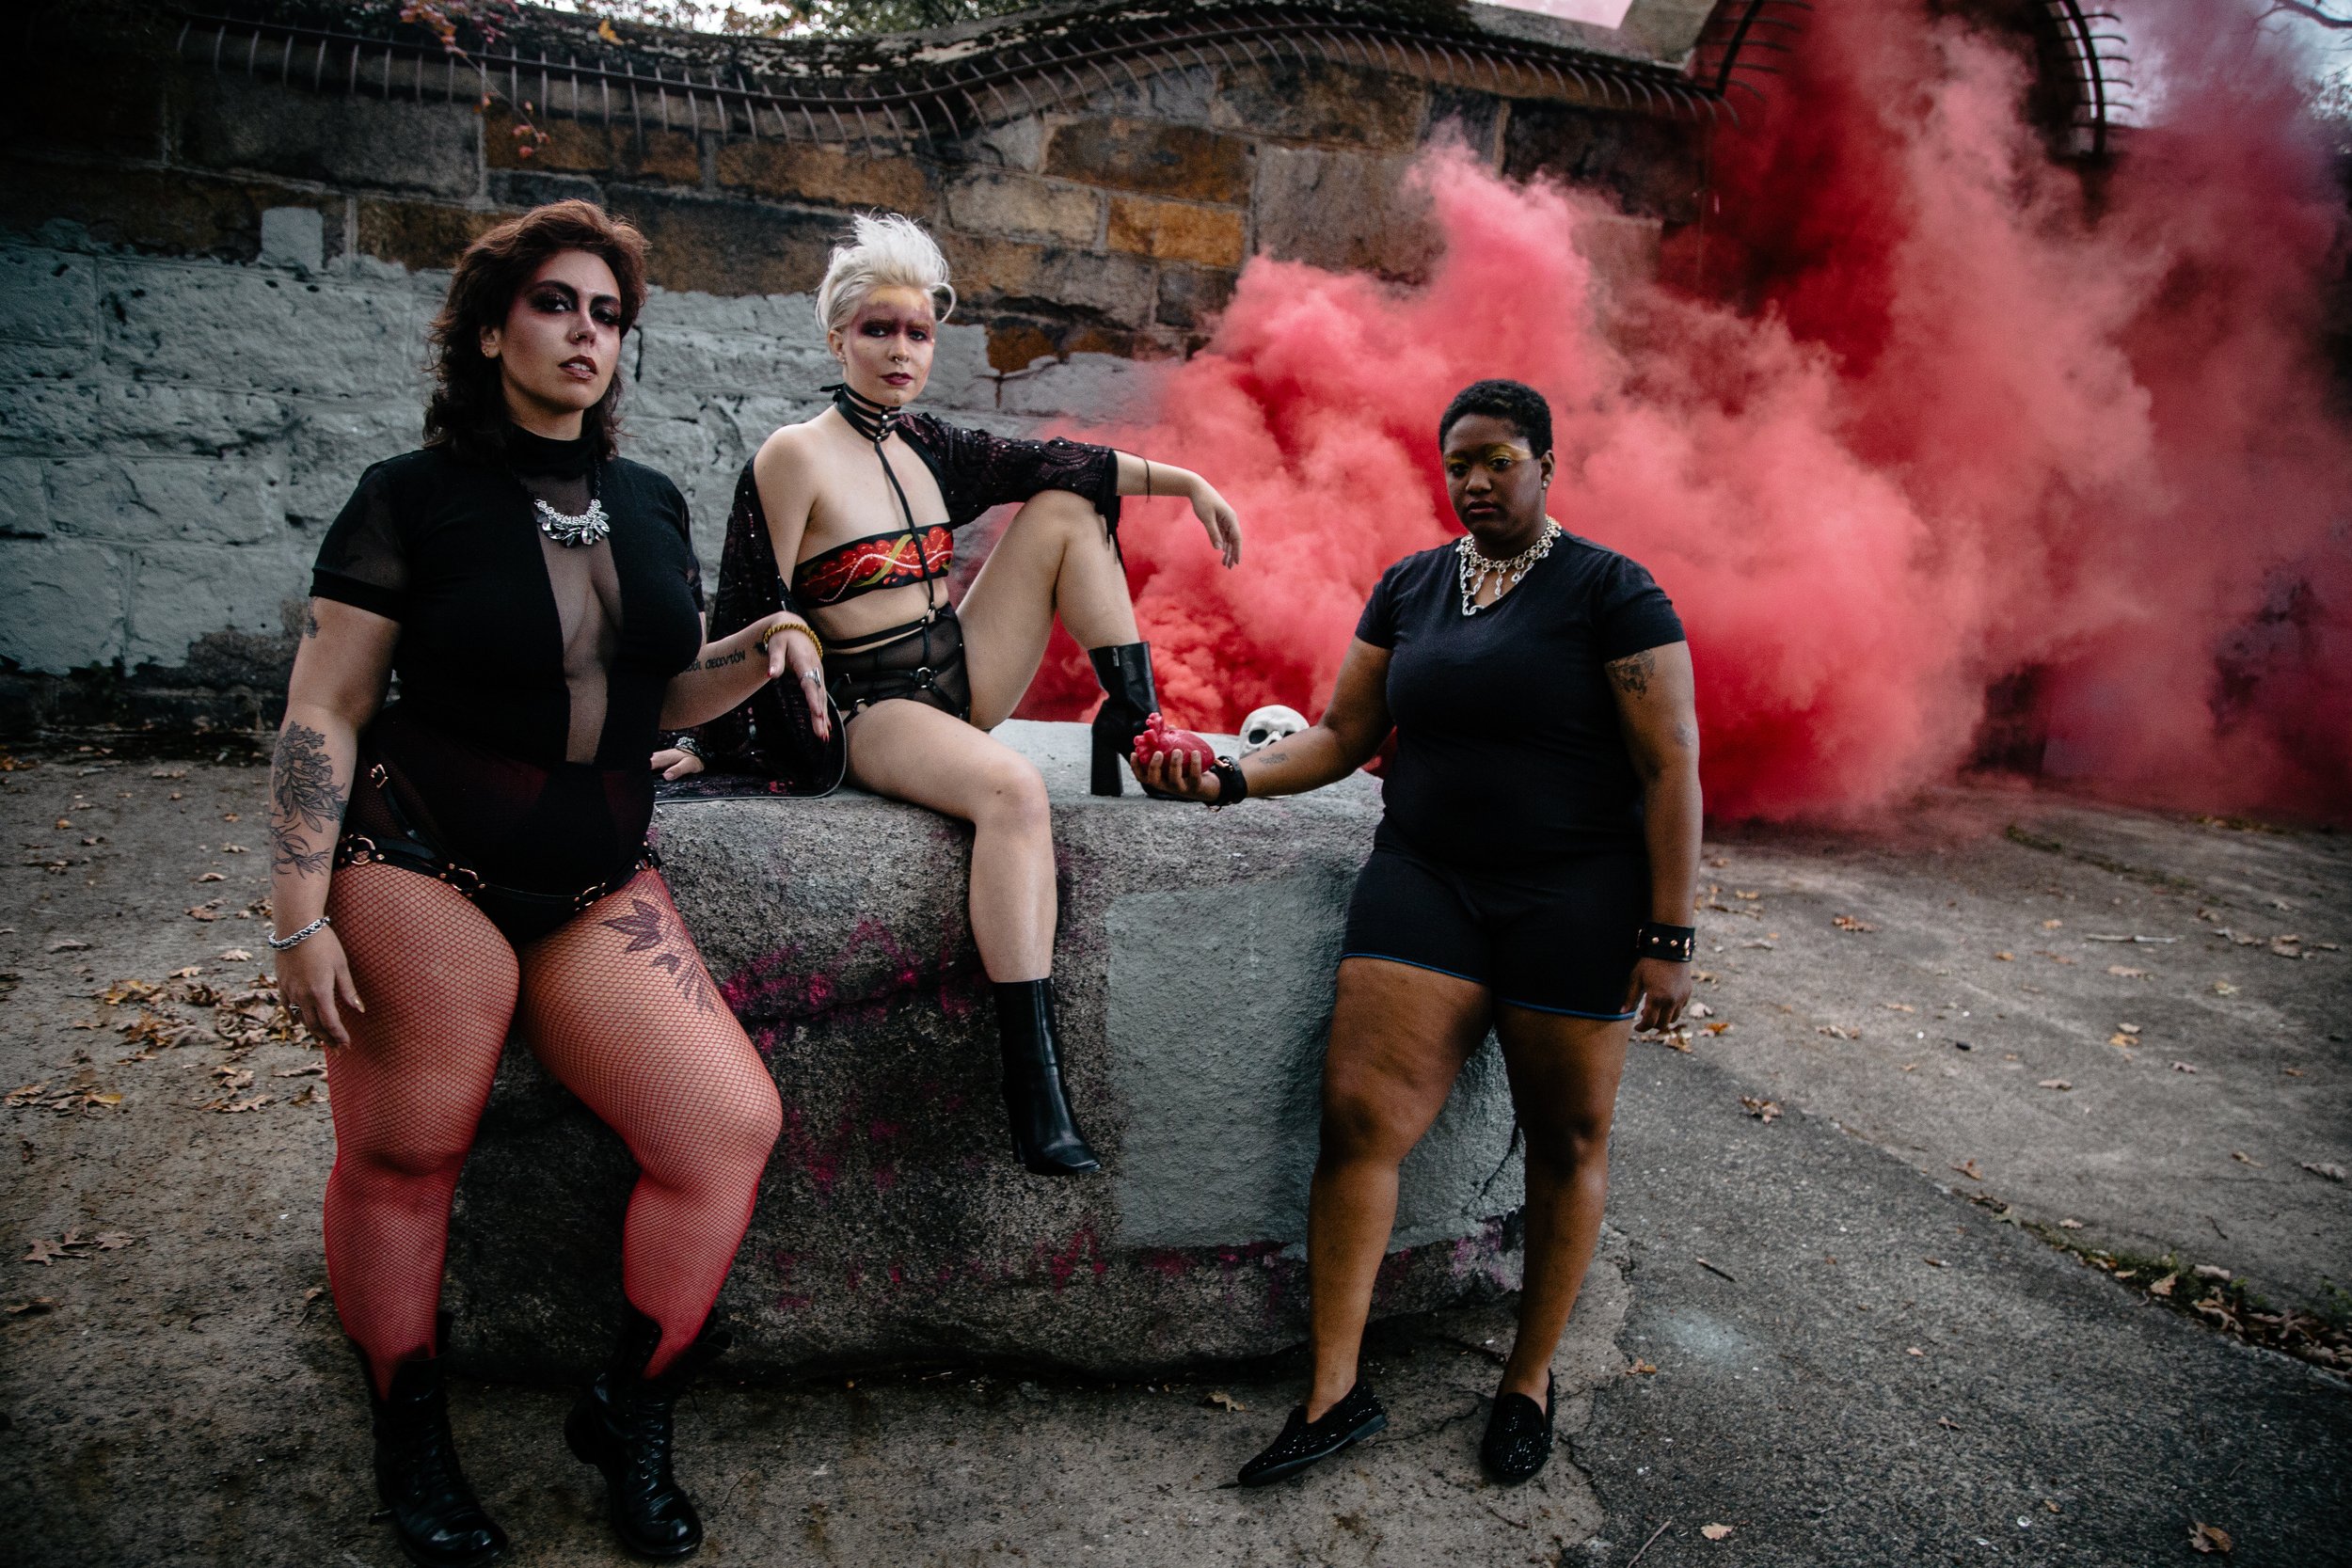  These images are part of a larger collaboration between Photographer Joey Phoenix, Makeup Artist Nicole Celso, and 3 Local Designers: Leather by Kal, Skeletons in the Closet, and Sparklies by Oli. These pieces were modeled by Ashley Nunez, Ilana Kap